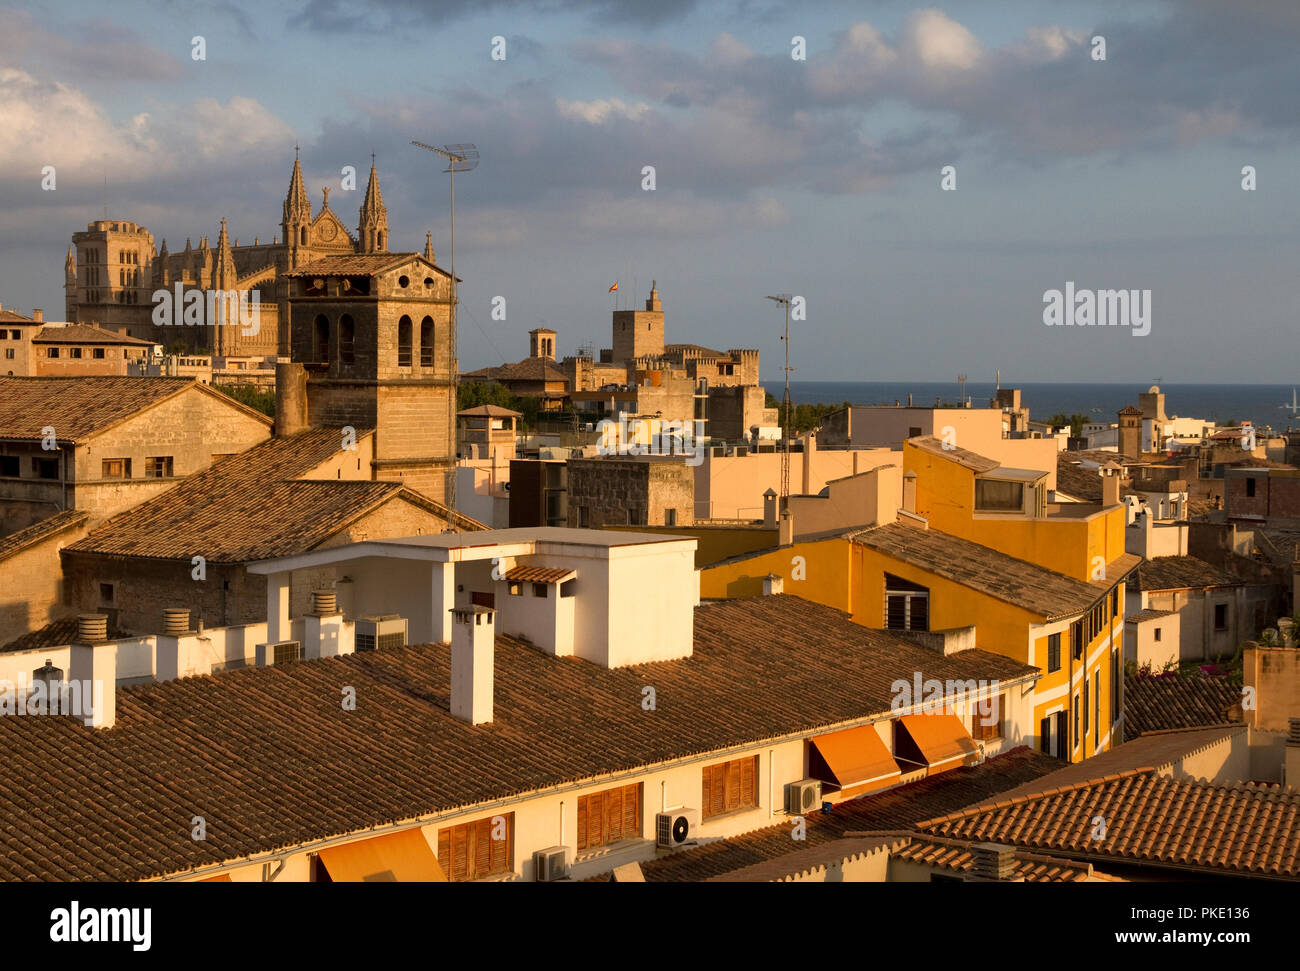 Palma, Majorca. City rooftops and cathedral in evening light. Stock Photo